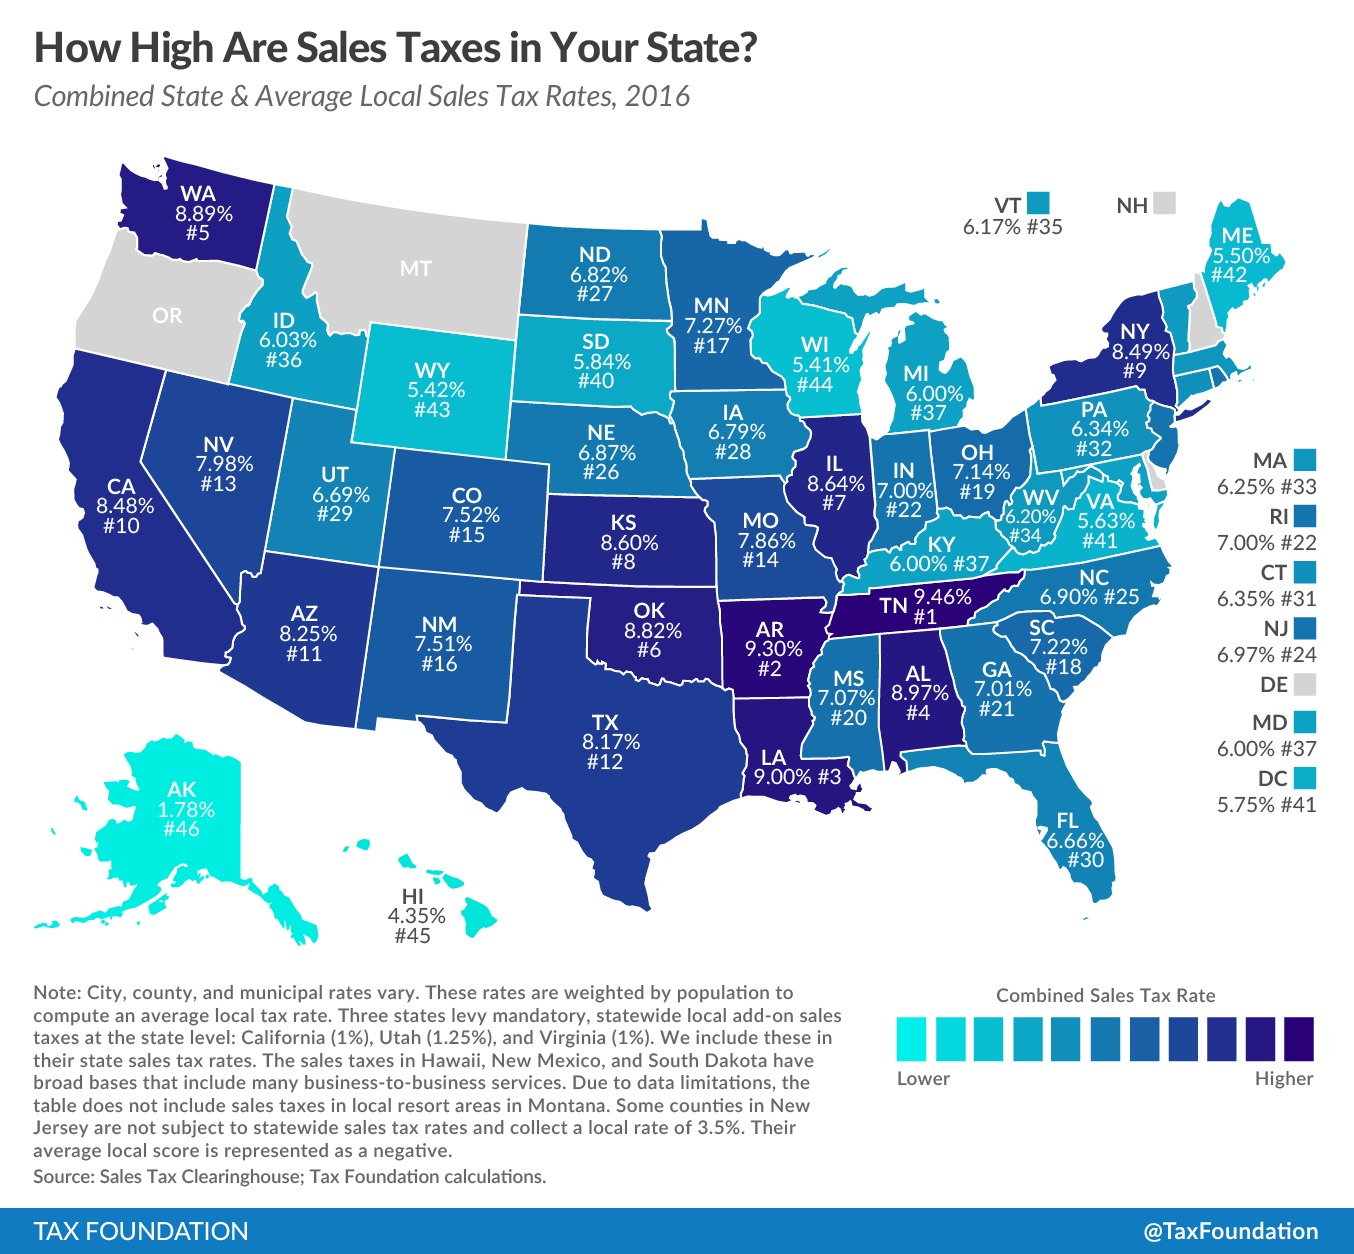 ouch-alabama-has-4th-highest-combined-sales-tax-rate-in-the-country